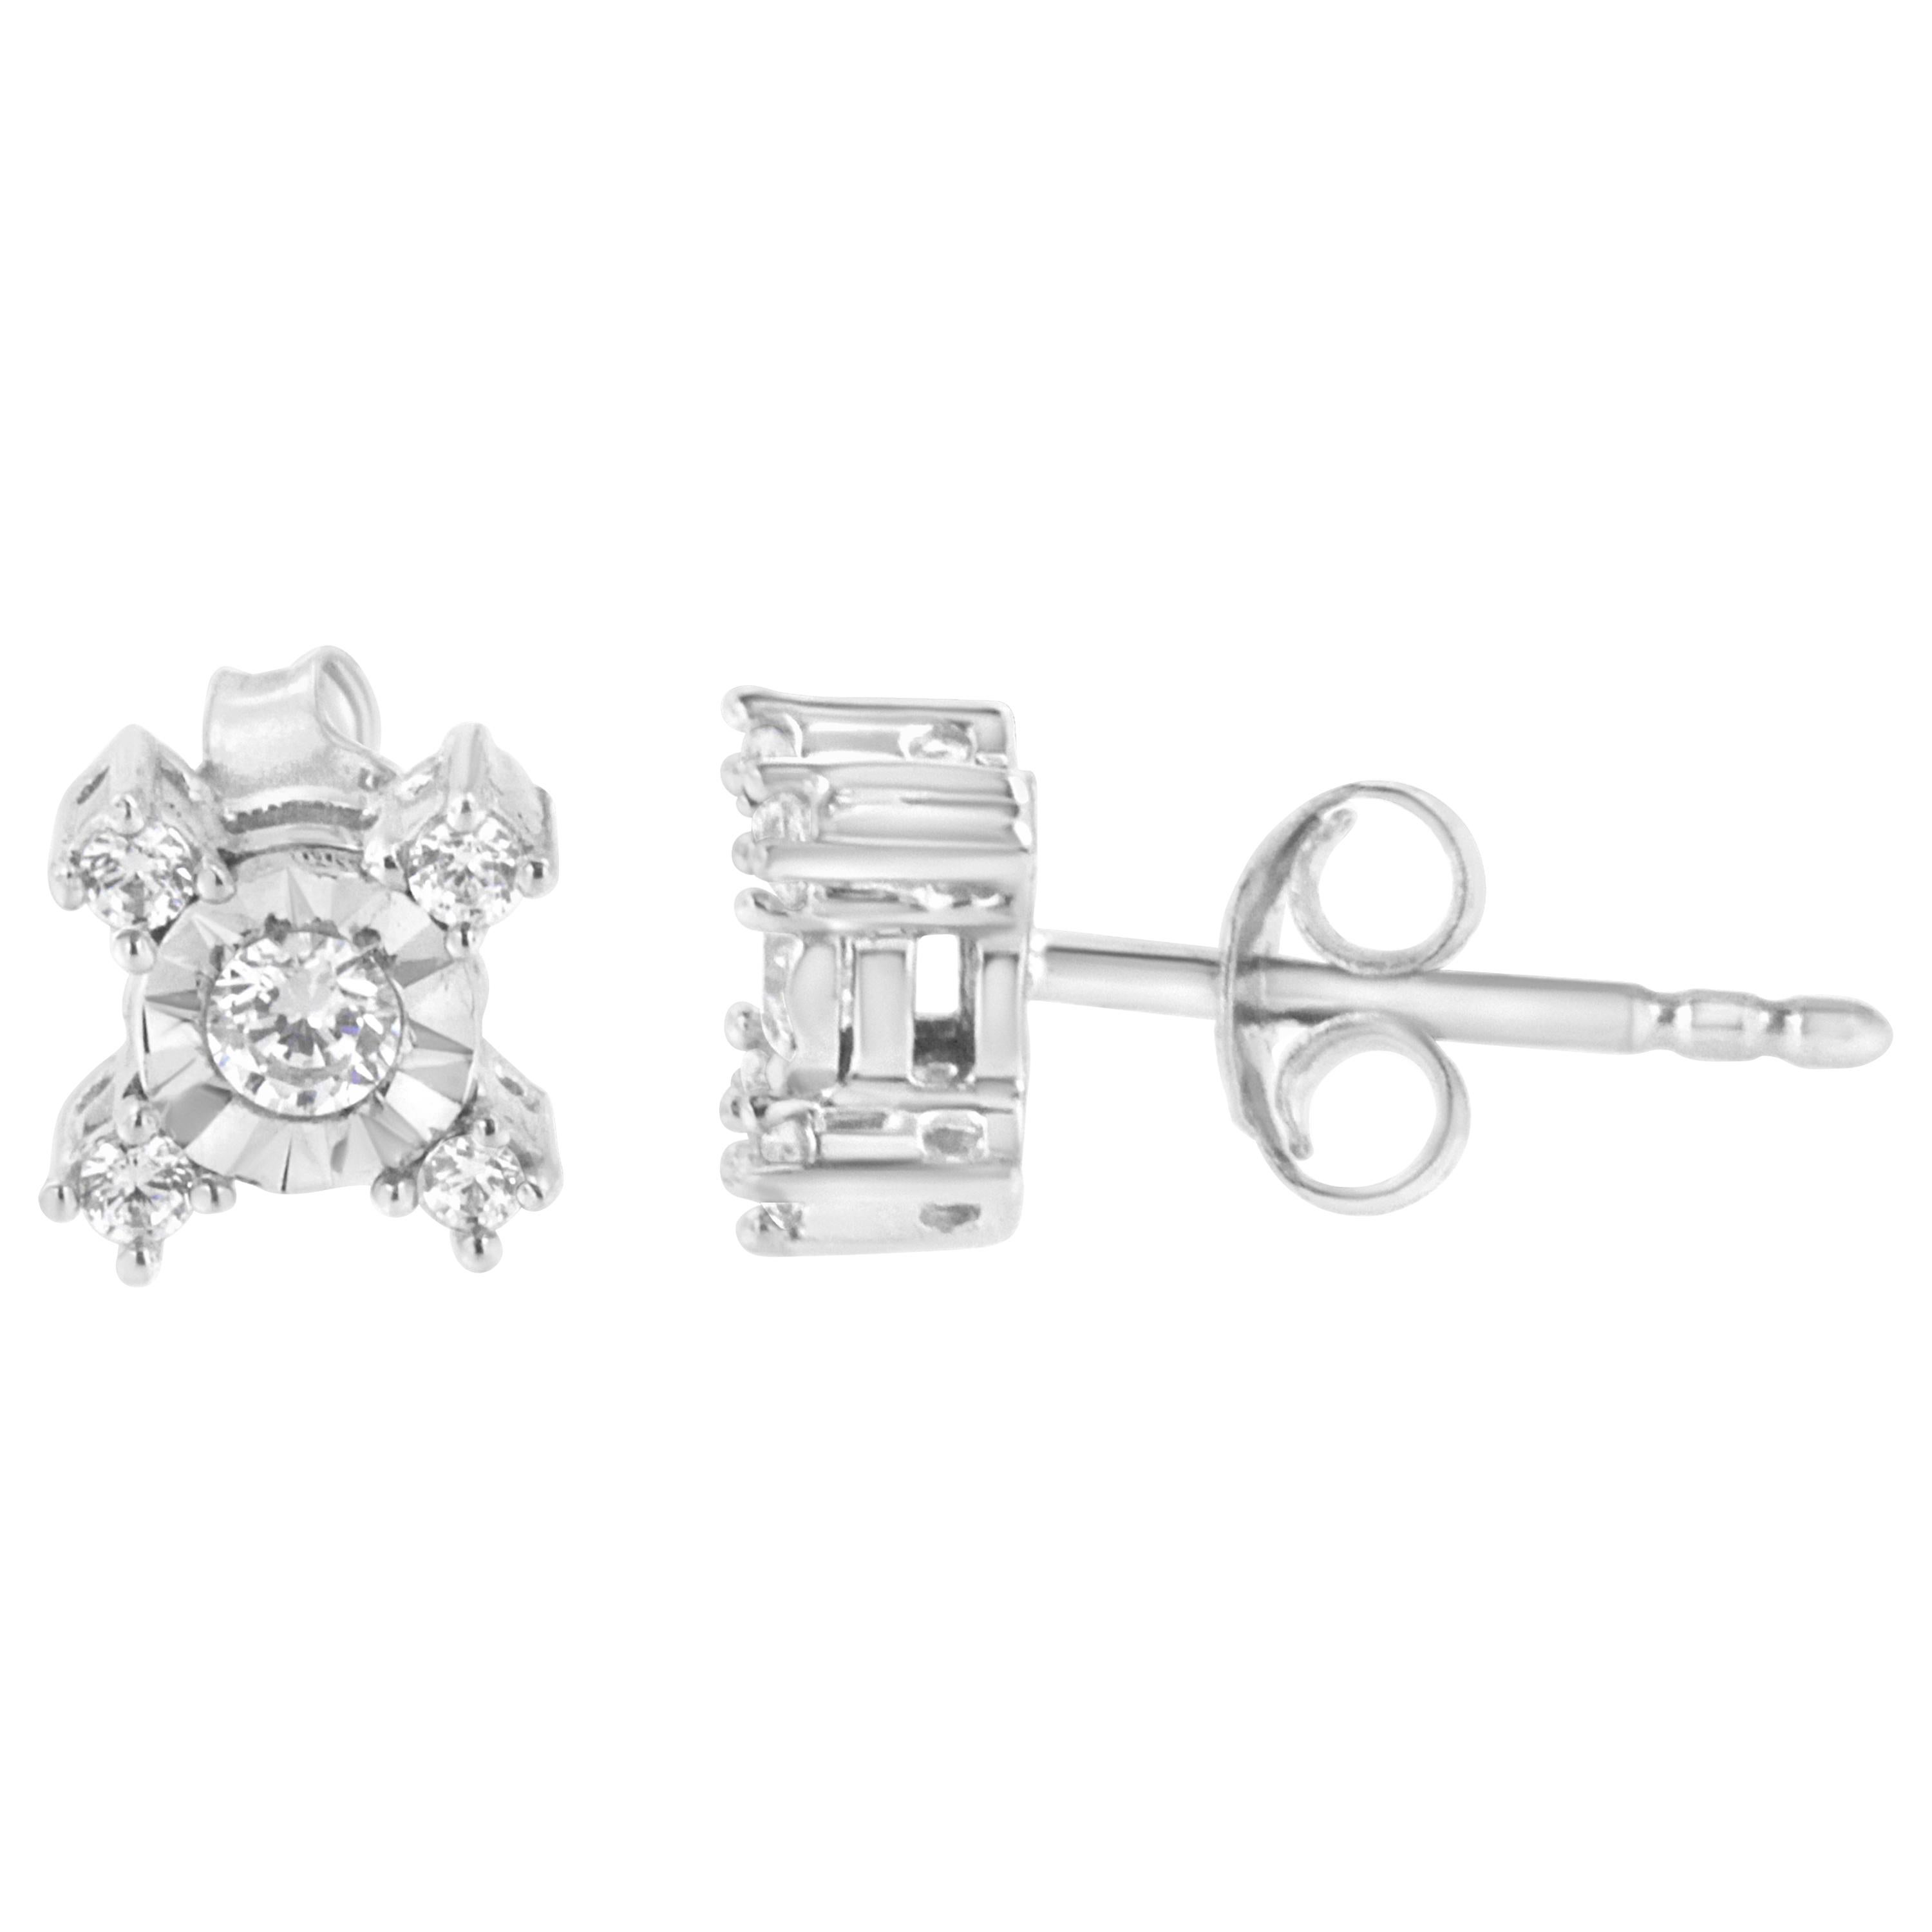 .925 Sterling Silver 1/4 Carat Miracle Plate Set Diamond "X" Shaped Stud Earring For Sale